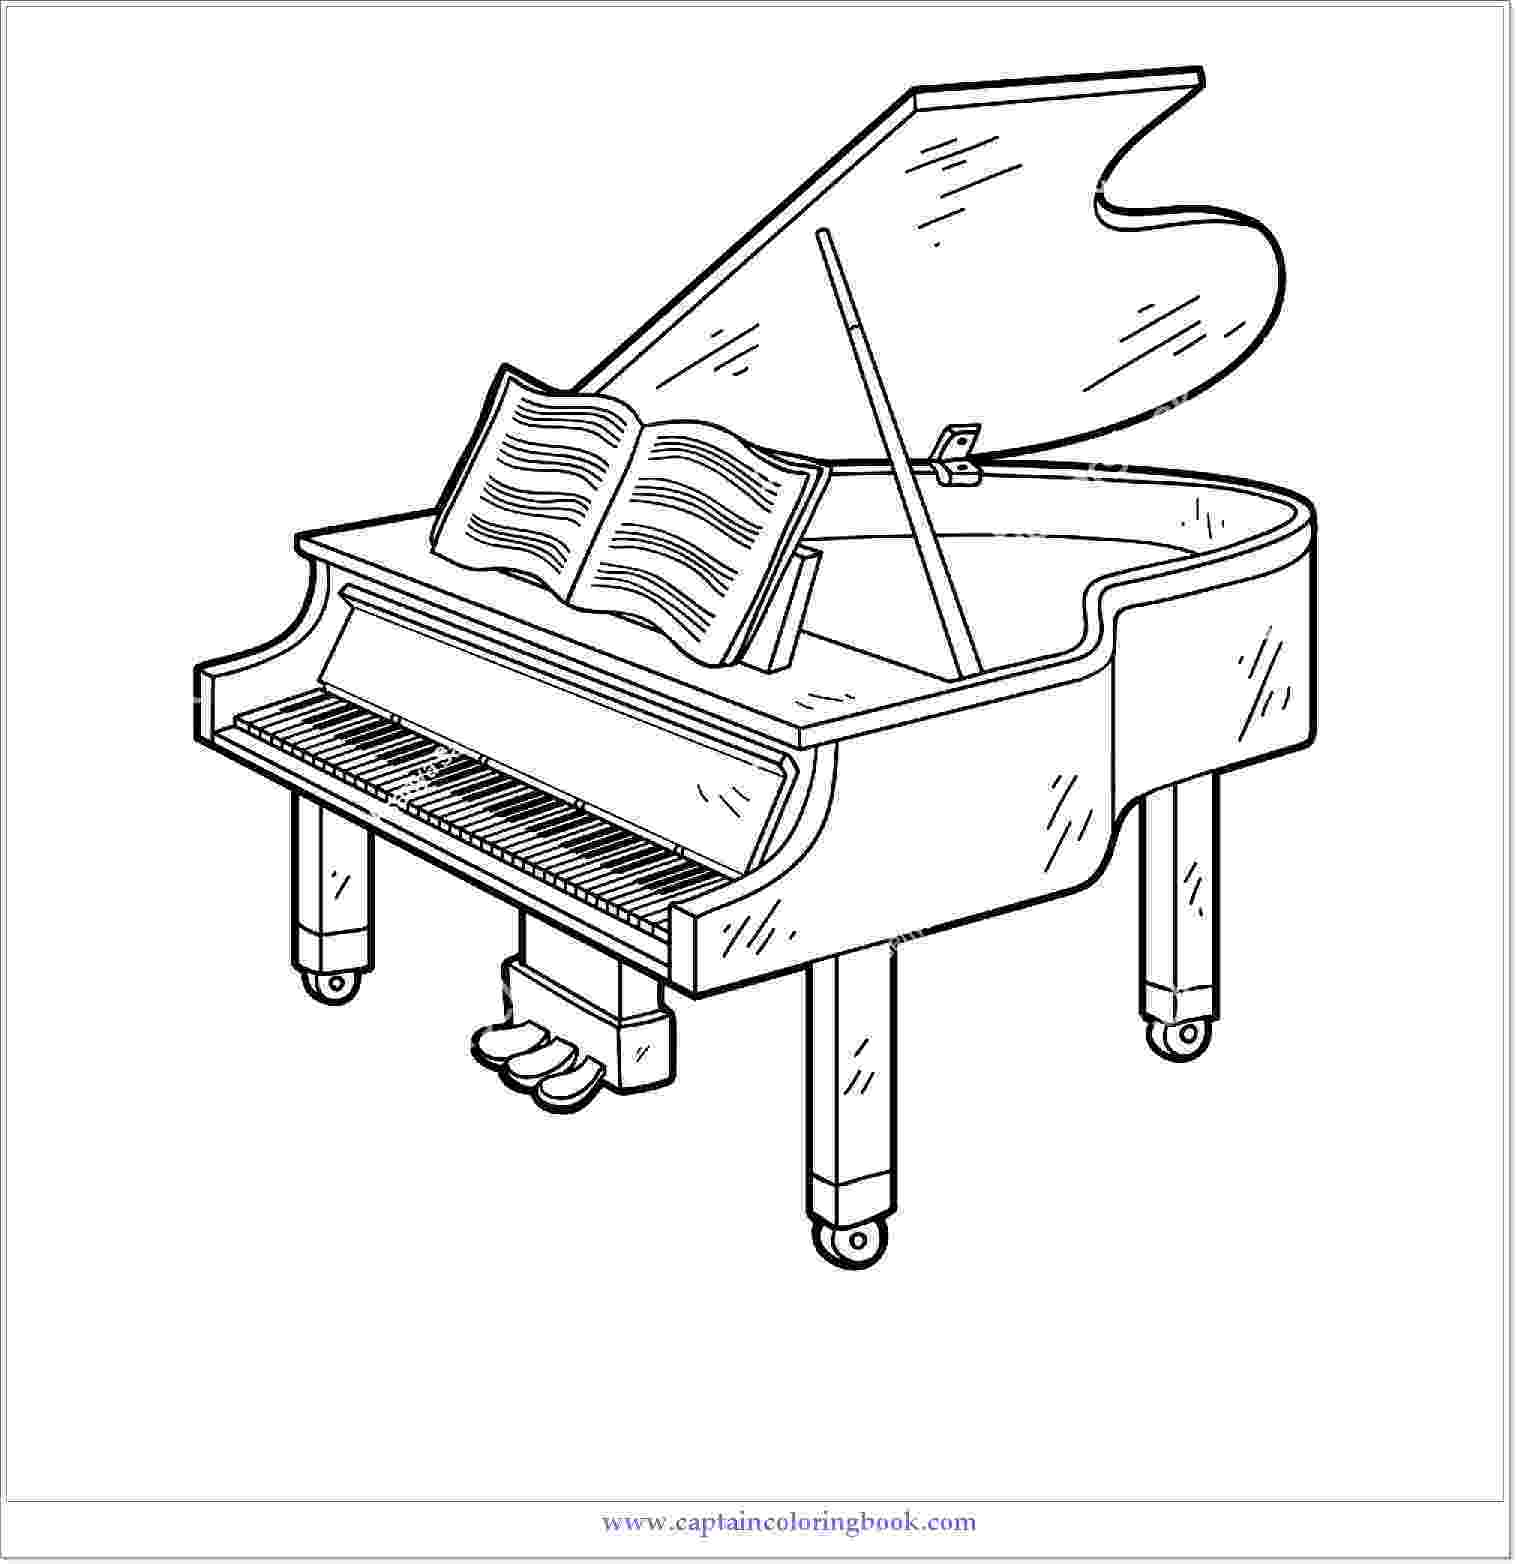 piano coloring pages piano coloring pages to download and print for free pages piano coloring 